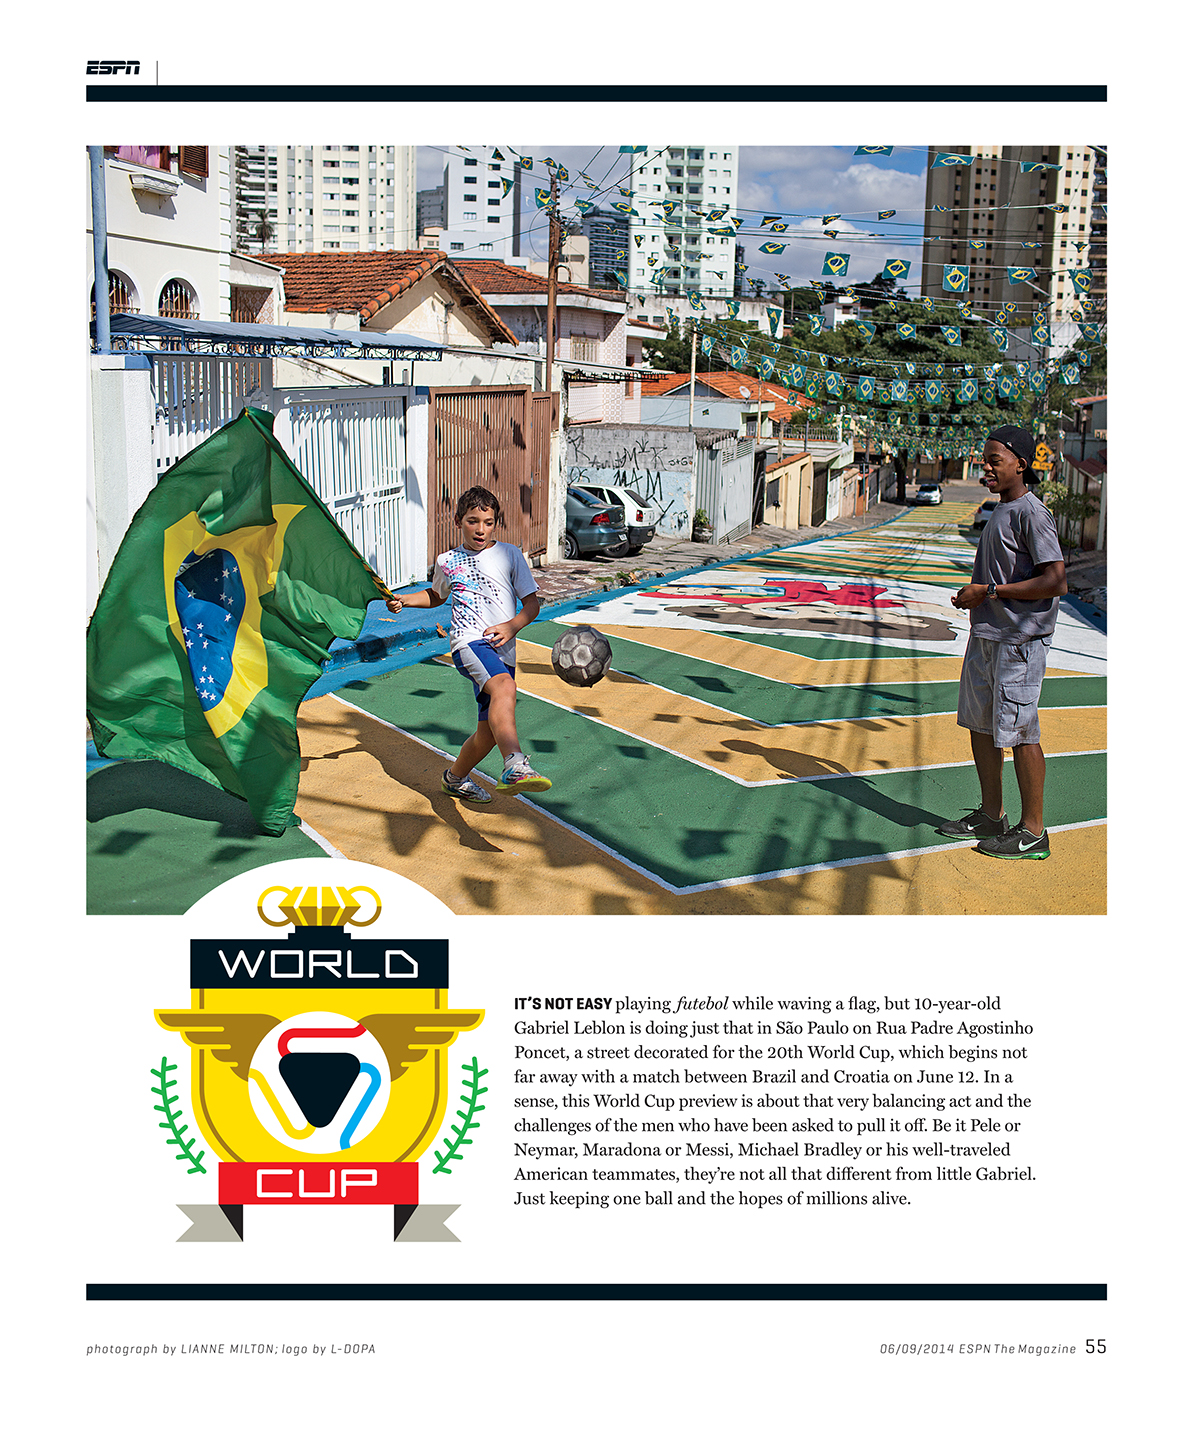 For ESPN MagazinePublished: June 6, 2014To view my old blog of previous published work please click here.